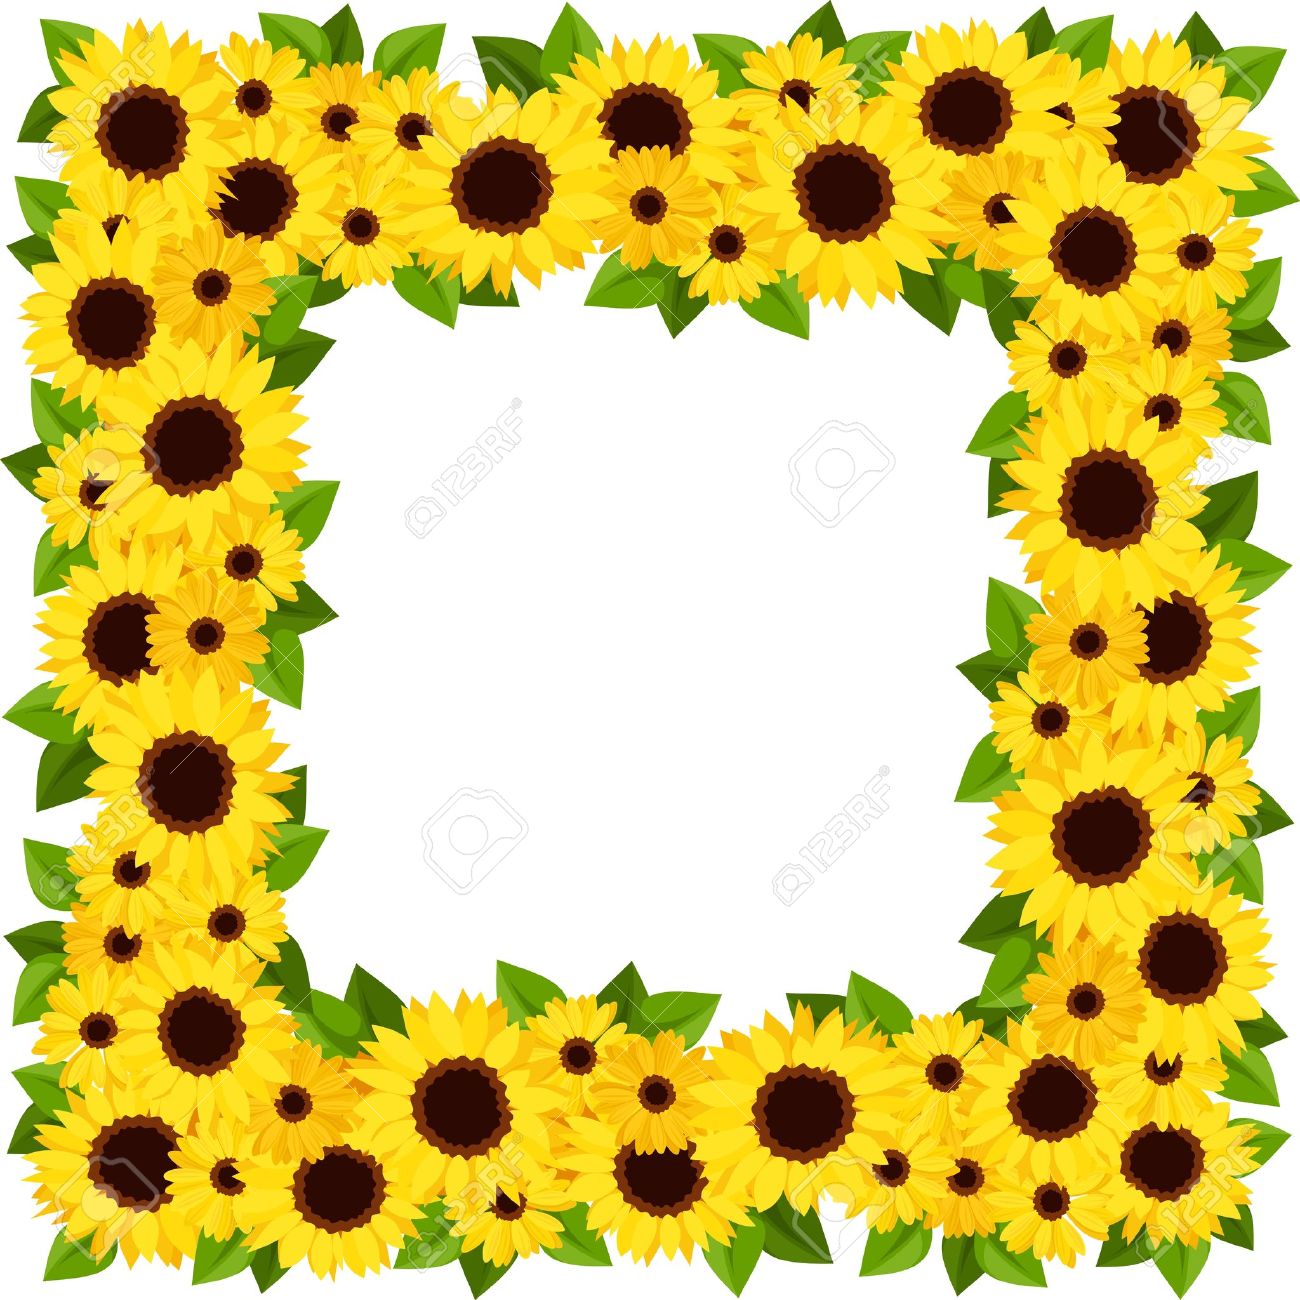 Sunflower Border | Free download on ClipArtMag